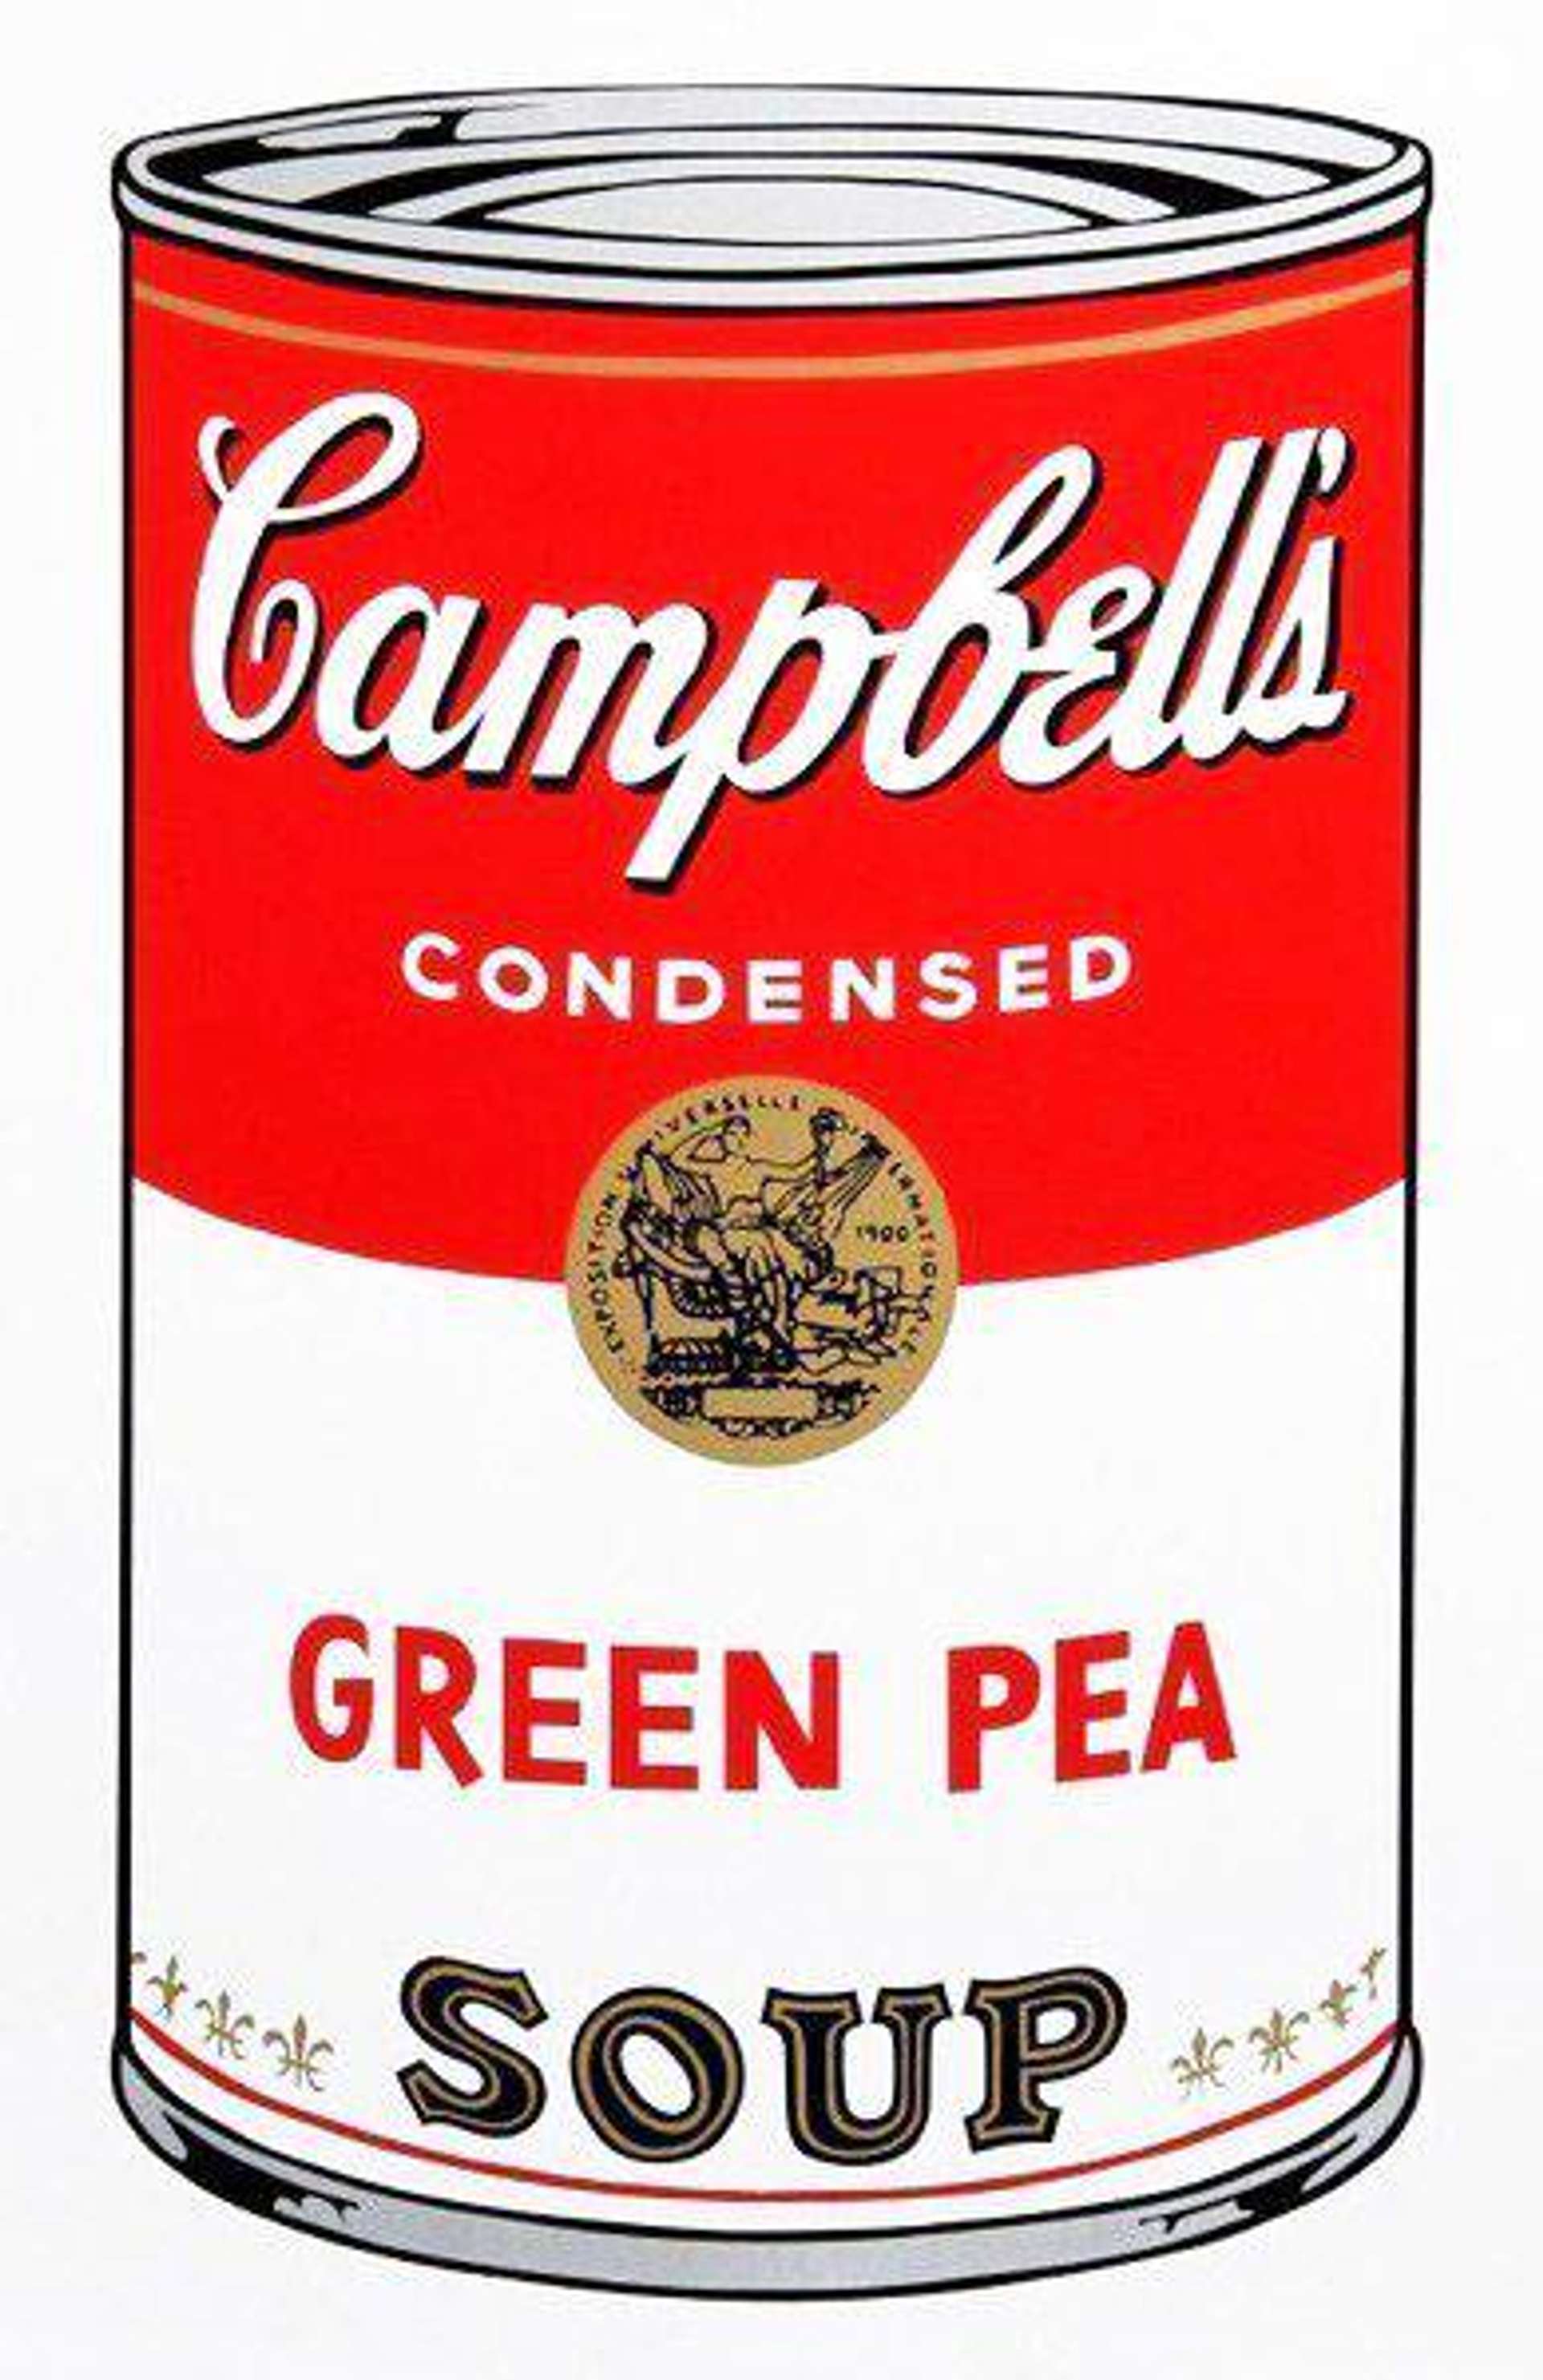 Campbell’s Soup I, Green Pea (F. & S. II.50) by Andy Warhol